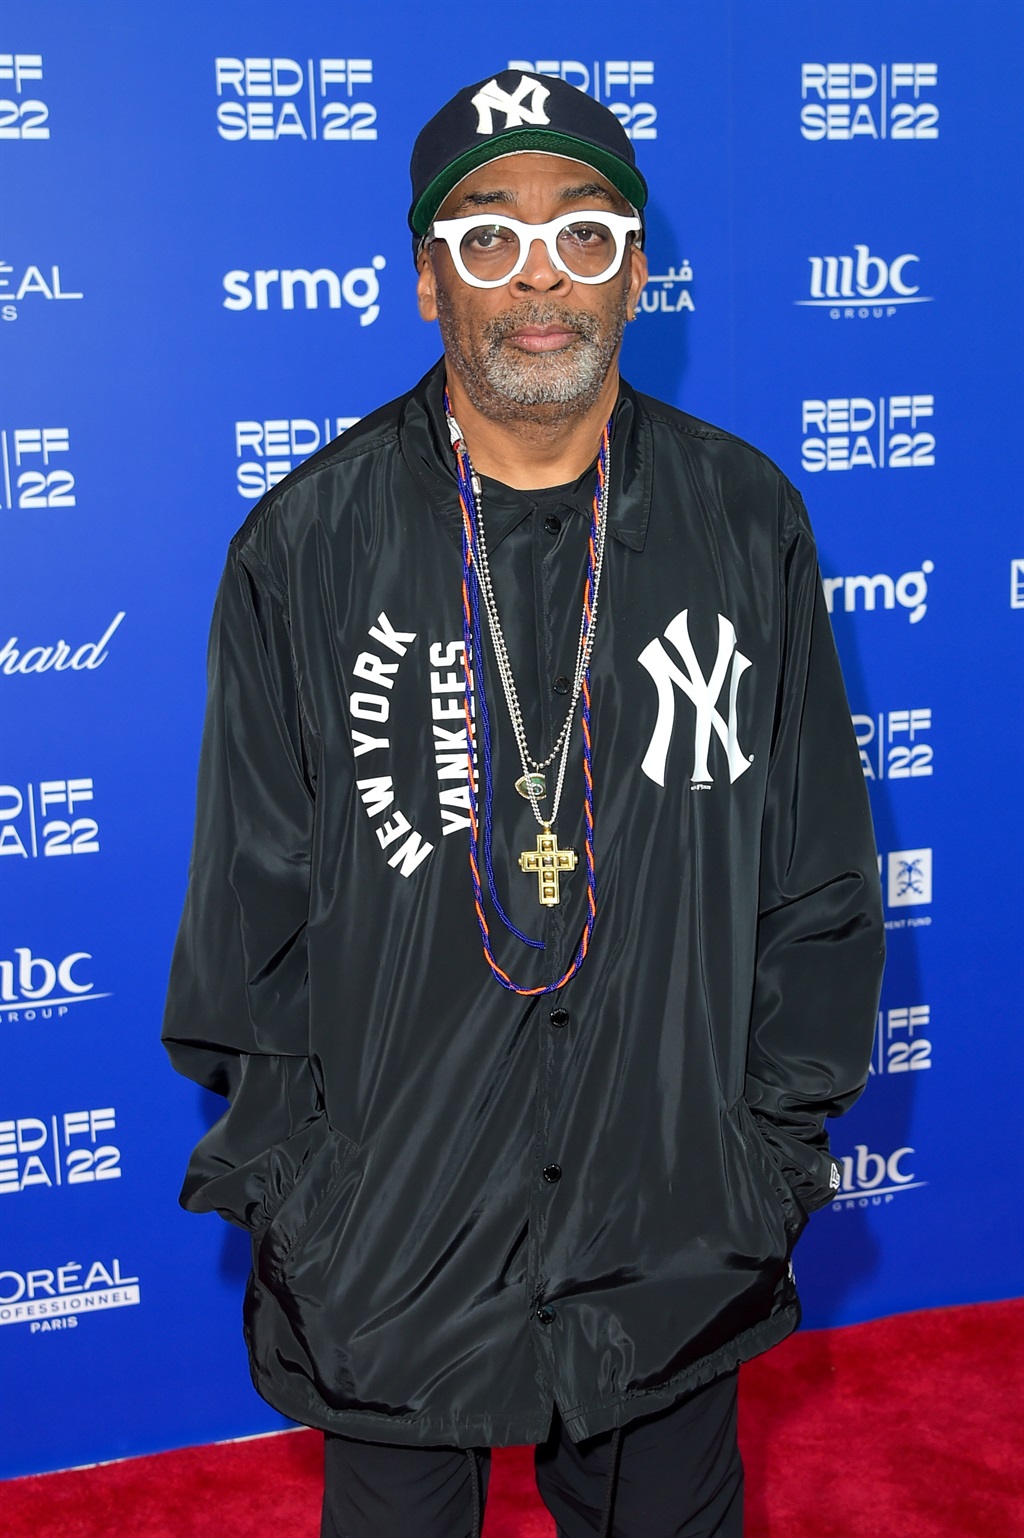 Spike Lee poses for photographs ahead of the In Conversation With Spike Lee at the Red Sea International Film Festival on December 04, 2022 in Jeddah, Saudi Arabia. (Photo by Eamonn M. McCormack/Getty Images for The Red Sea International Film Festival)